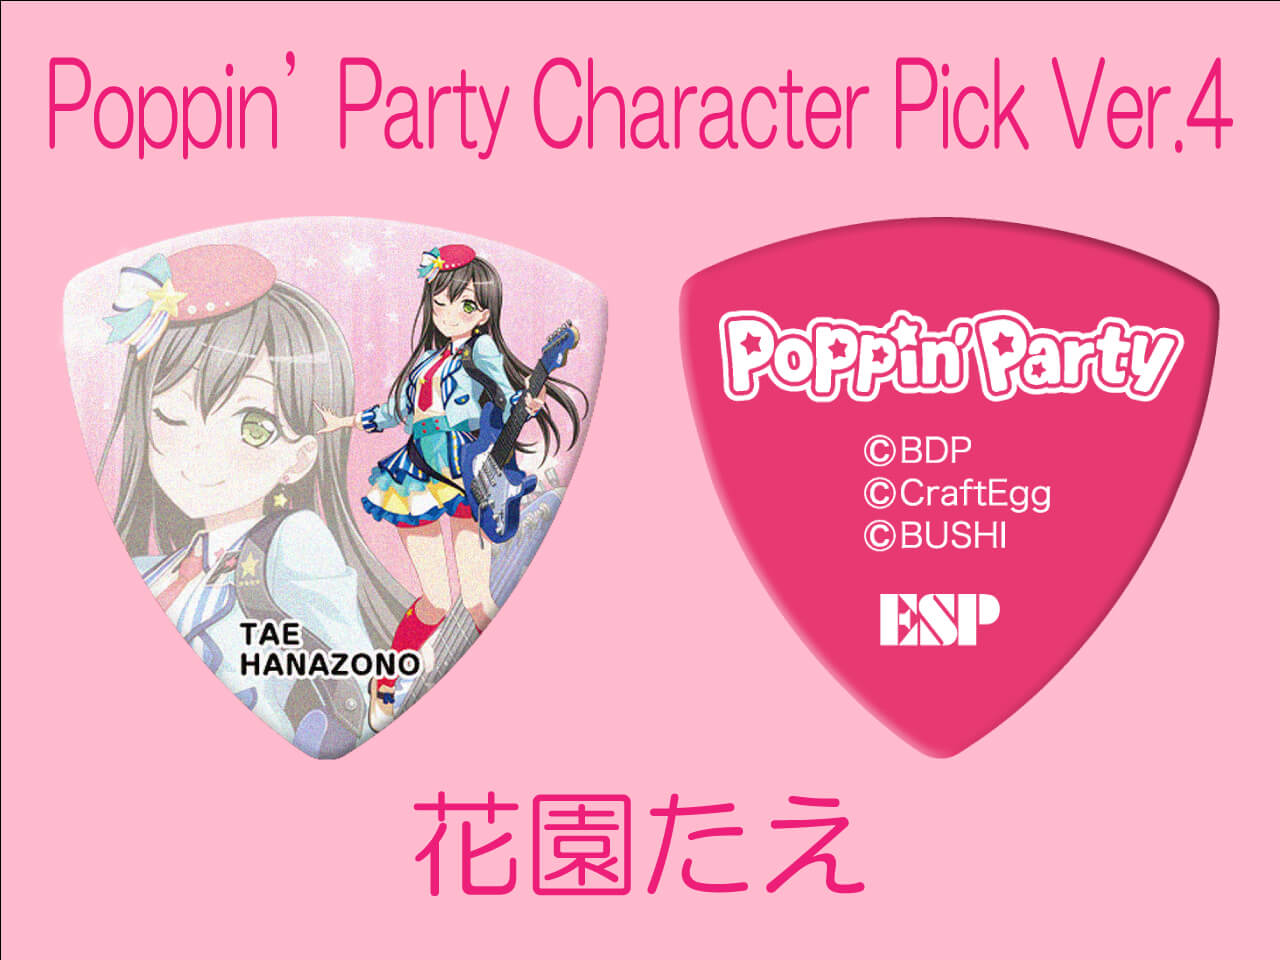 【ESP×BanG Dream!コラボピック】Poppin’Party Character Pick Ver.4 "花園たえ"10枚セット（GBP Tae Poppin Party 4 ）